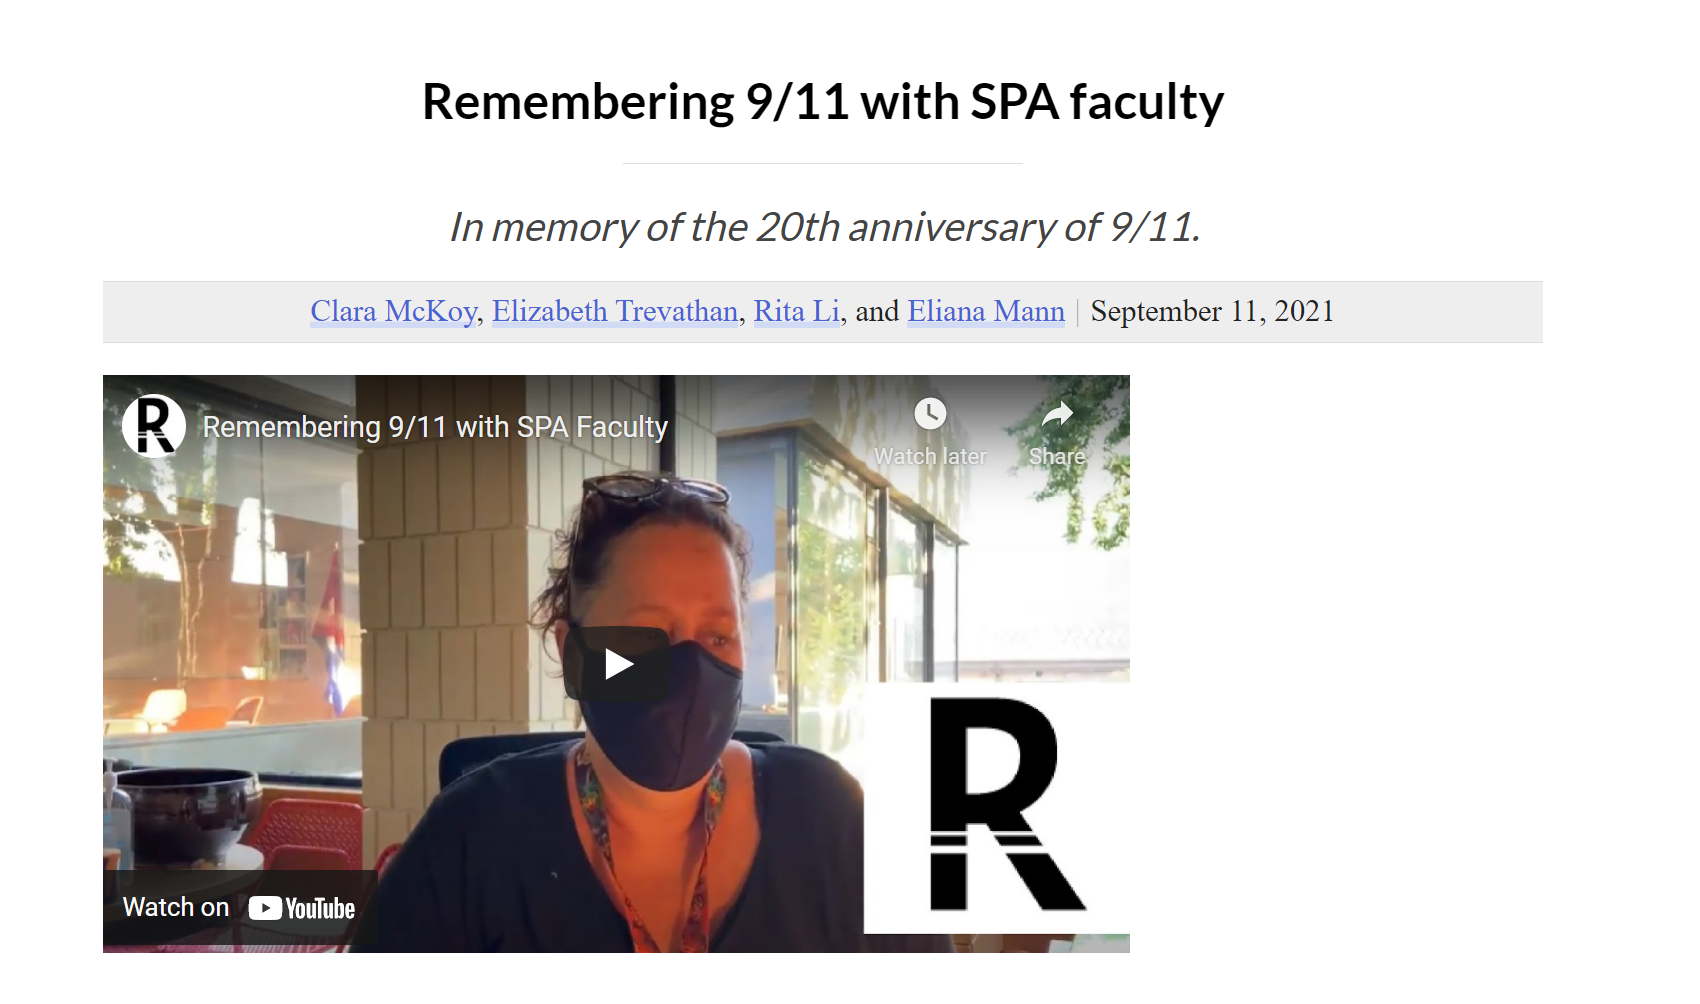 Remembering 9/11 with SPA faculty